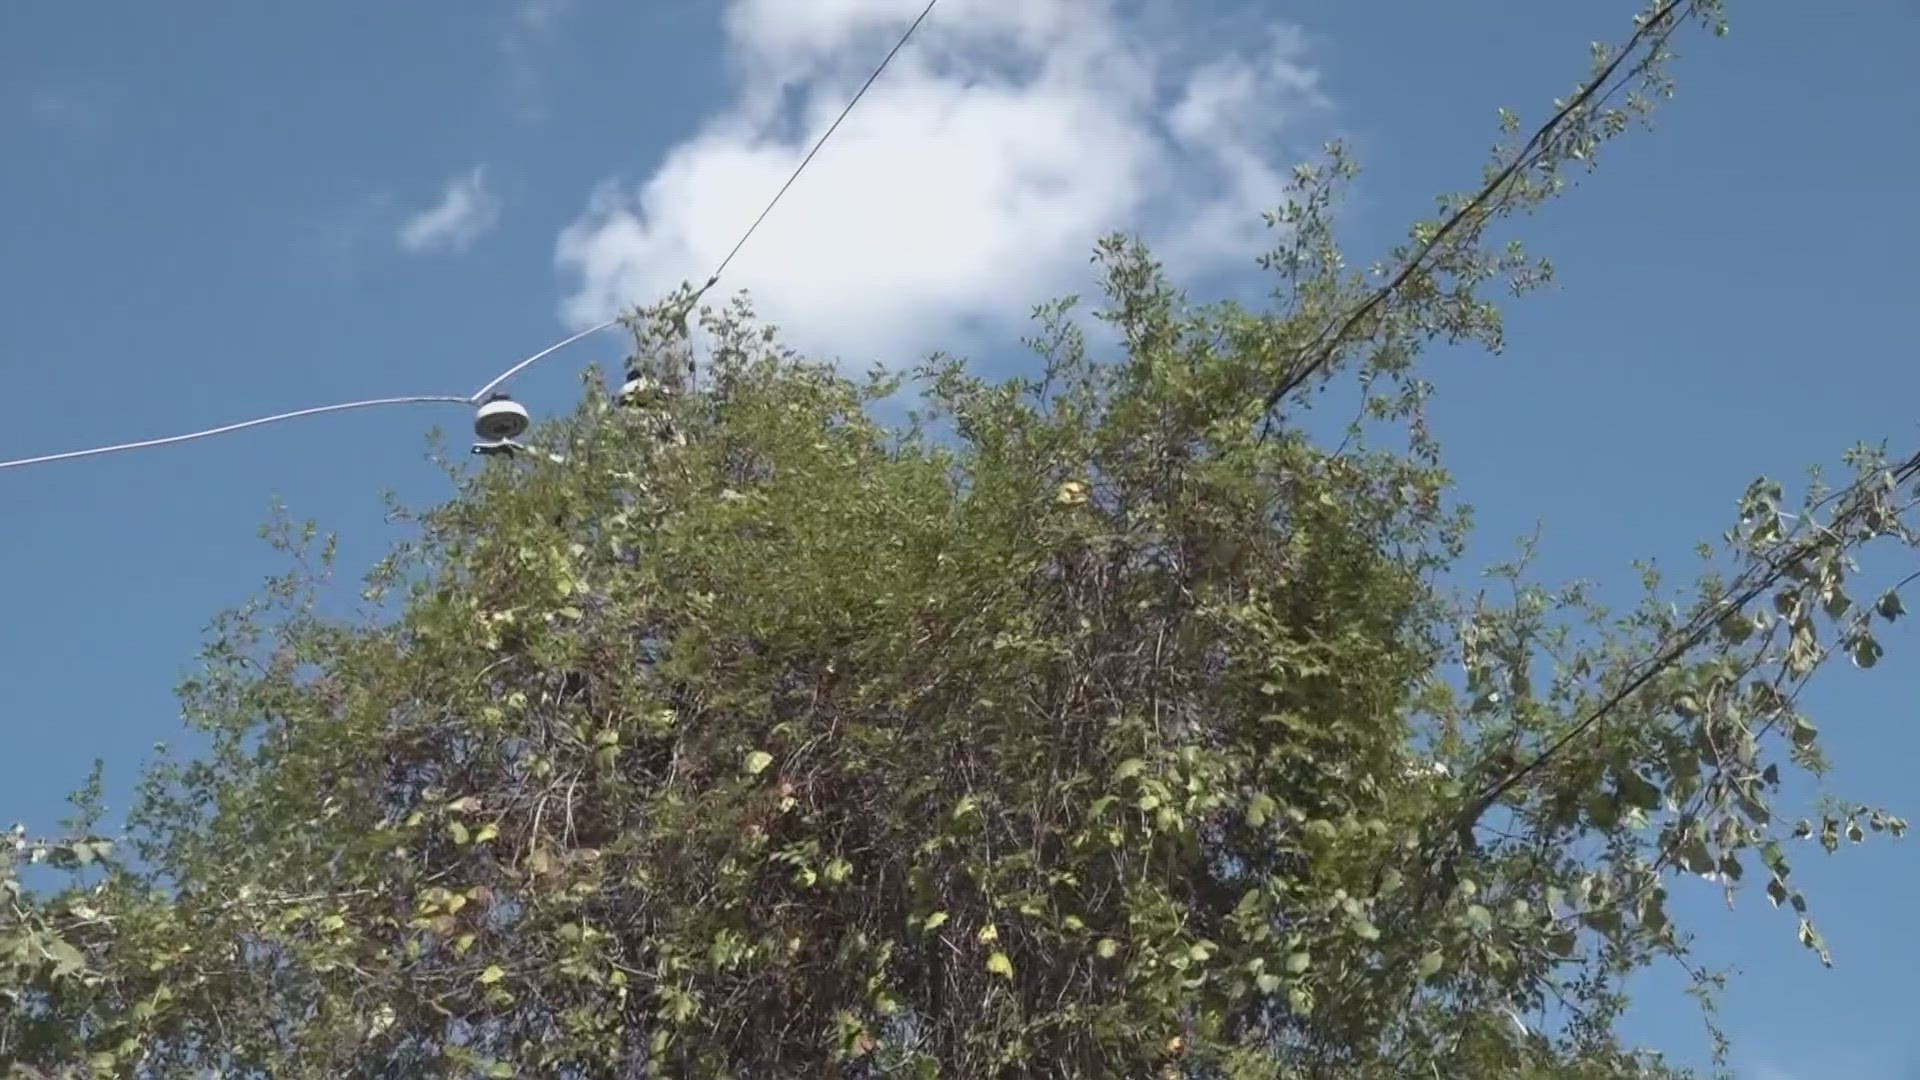 Homeowners ask 6 Fix to help get contractors out to get rid of vines on power lines.